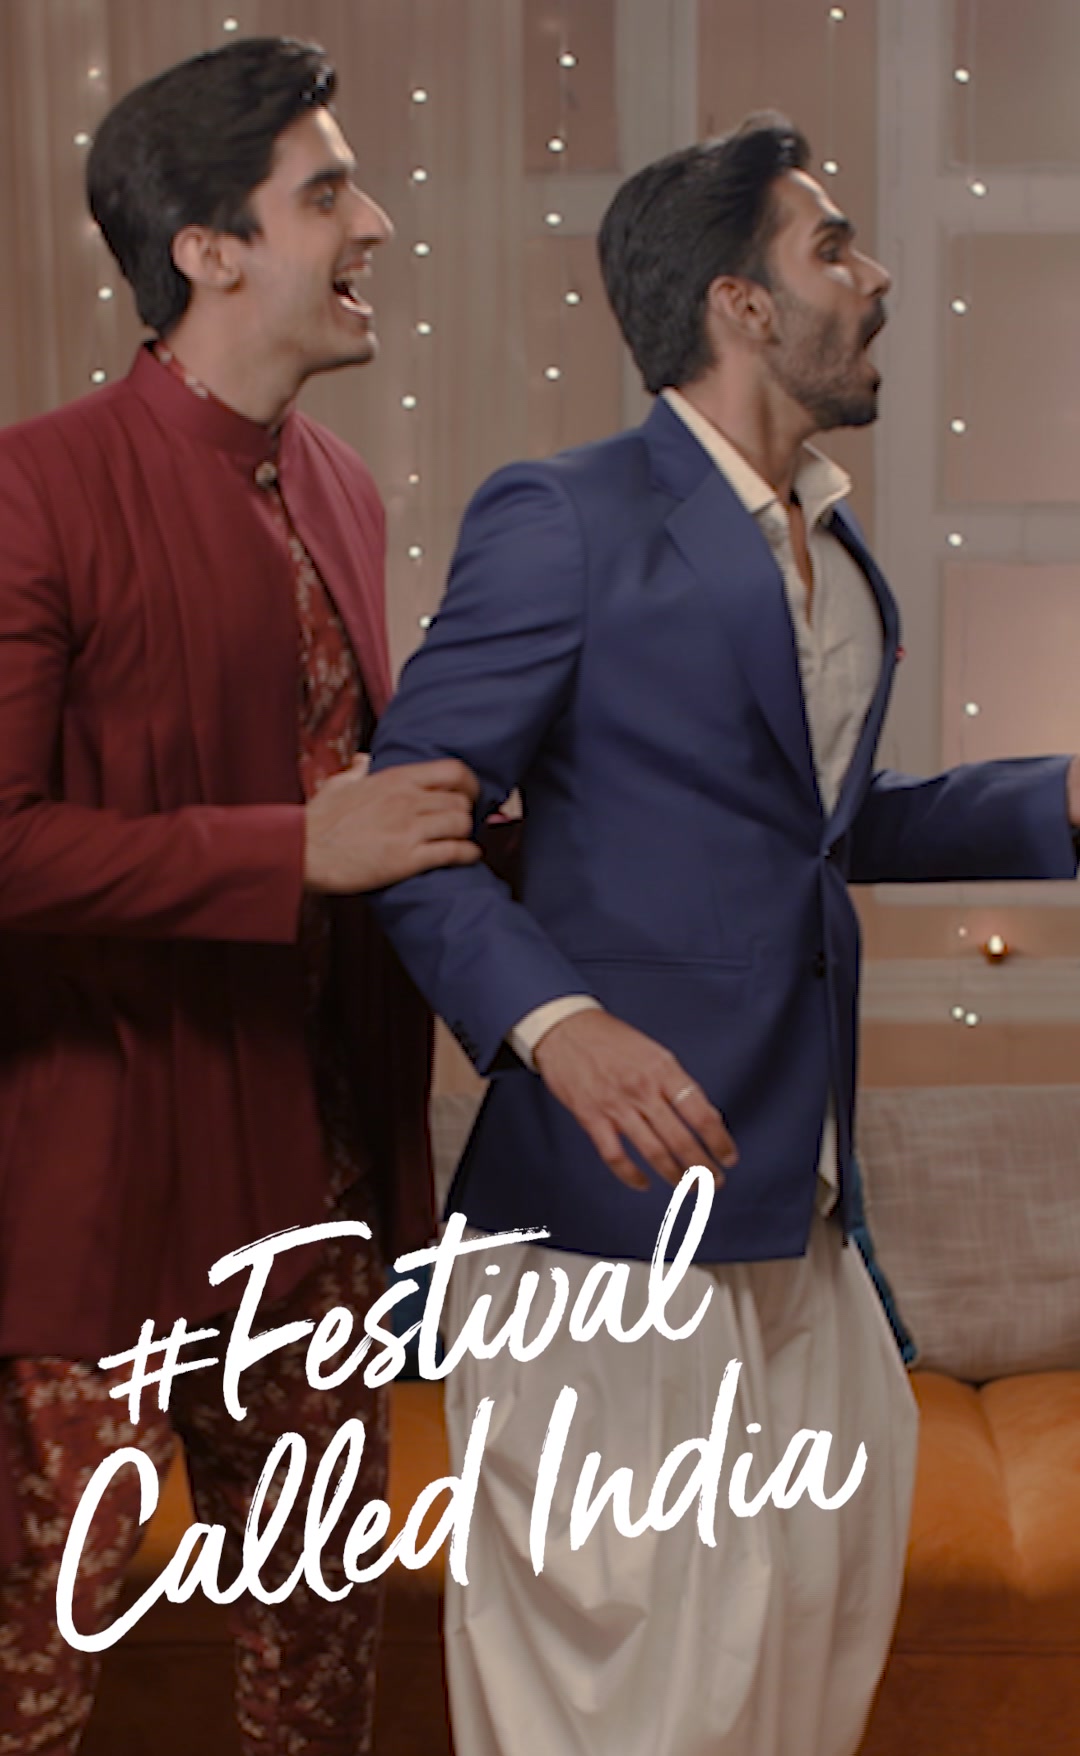 Turn the sweet moments into memories forever. Look your best in the #FestivalCalledIndia. 

Fine suiting and shirting fabrics are available at The Arvind Store!

#Arvind #FashioningPossibilities  #LandOfFestivals #FestiveReady #AnOdeToCelebrations #FestiveLook #FestiveLookBook #ArvindLookBook #EthnicWears #TraditionalOutfits #Menswear #ClassicCollection